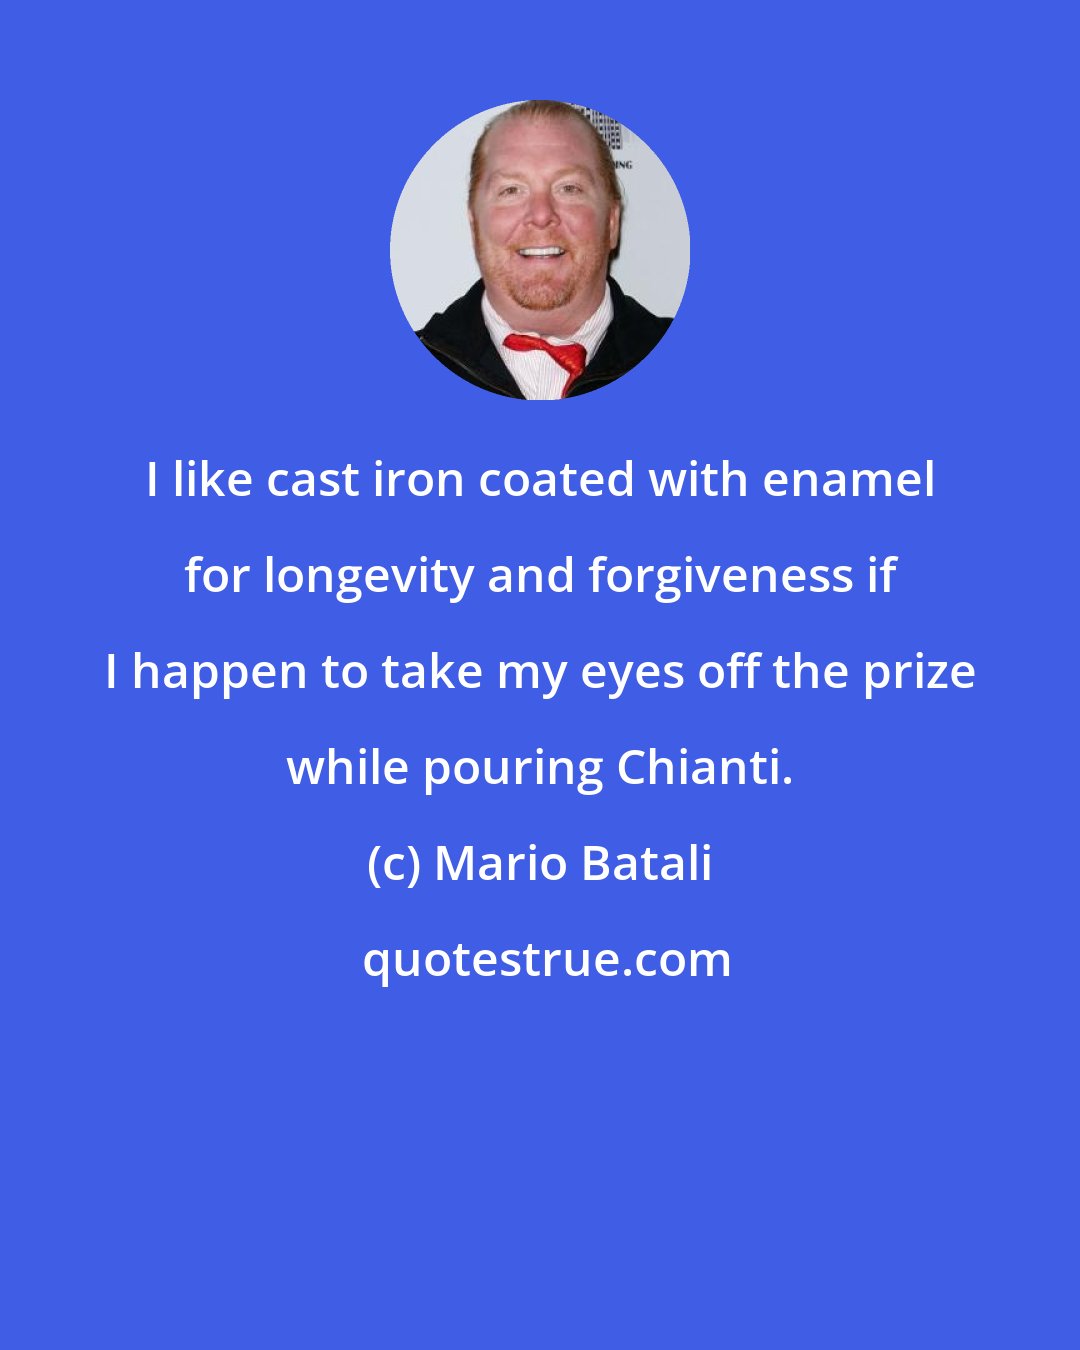 Mario Batali: I like cast iron coated with enamel for longevity and forgiveness if I happen to take my eyes off the prize while pouring Chianti.